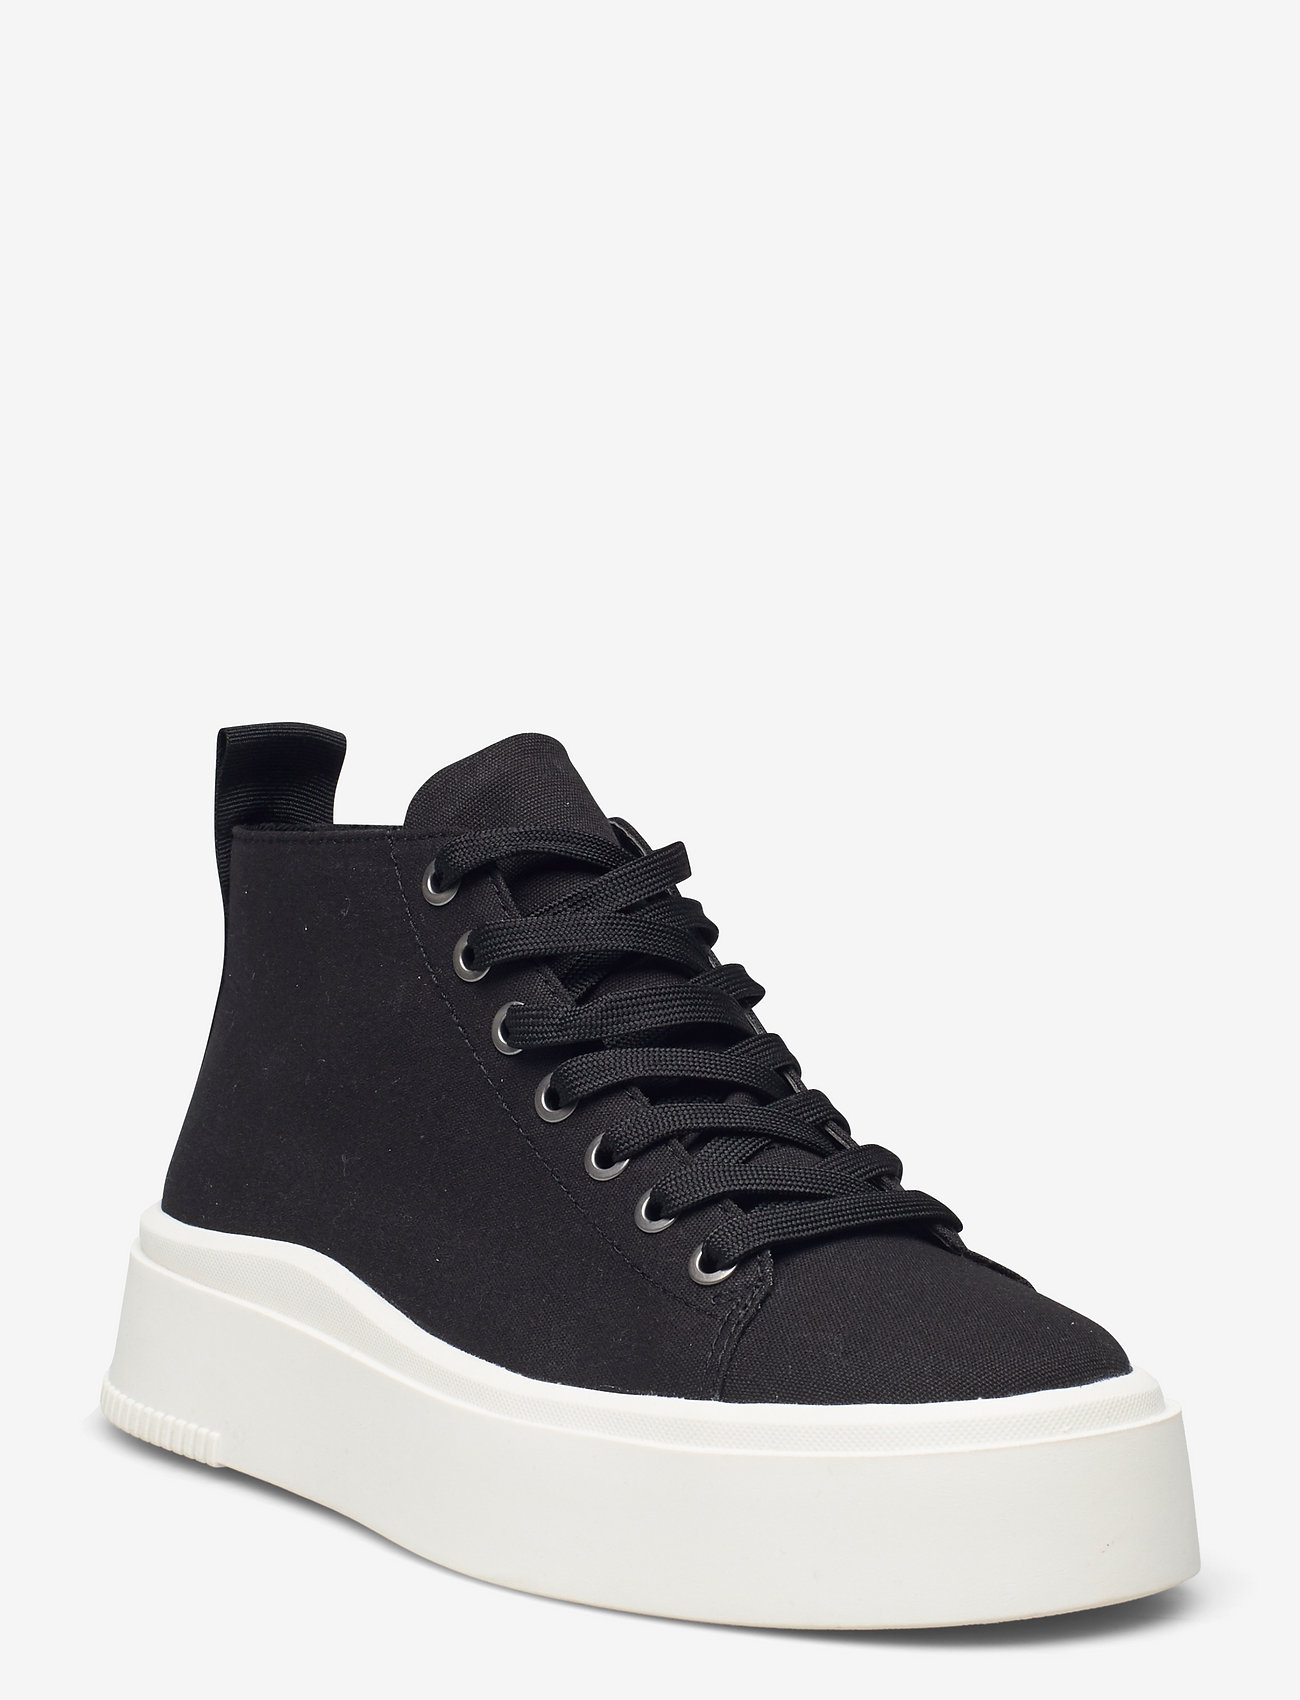 VAGABOND - STACY - high top sneakers - black - 0